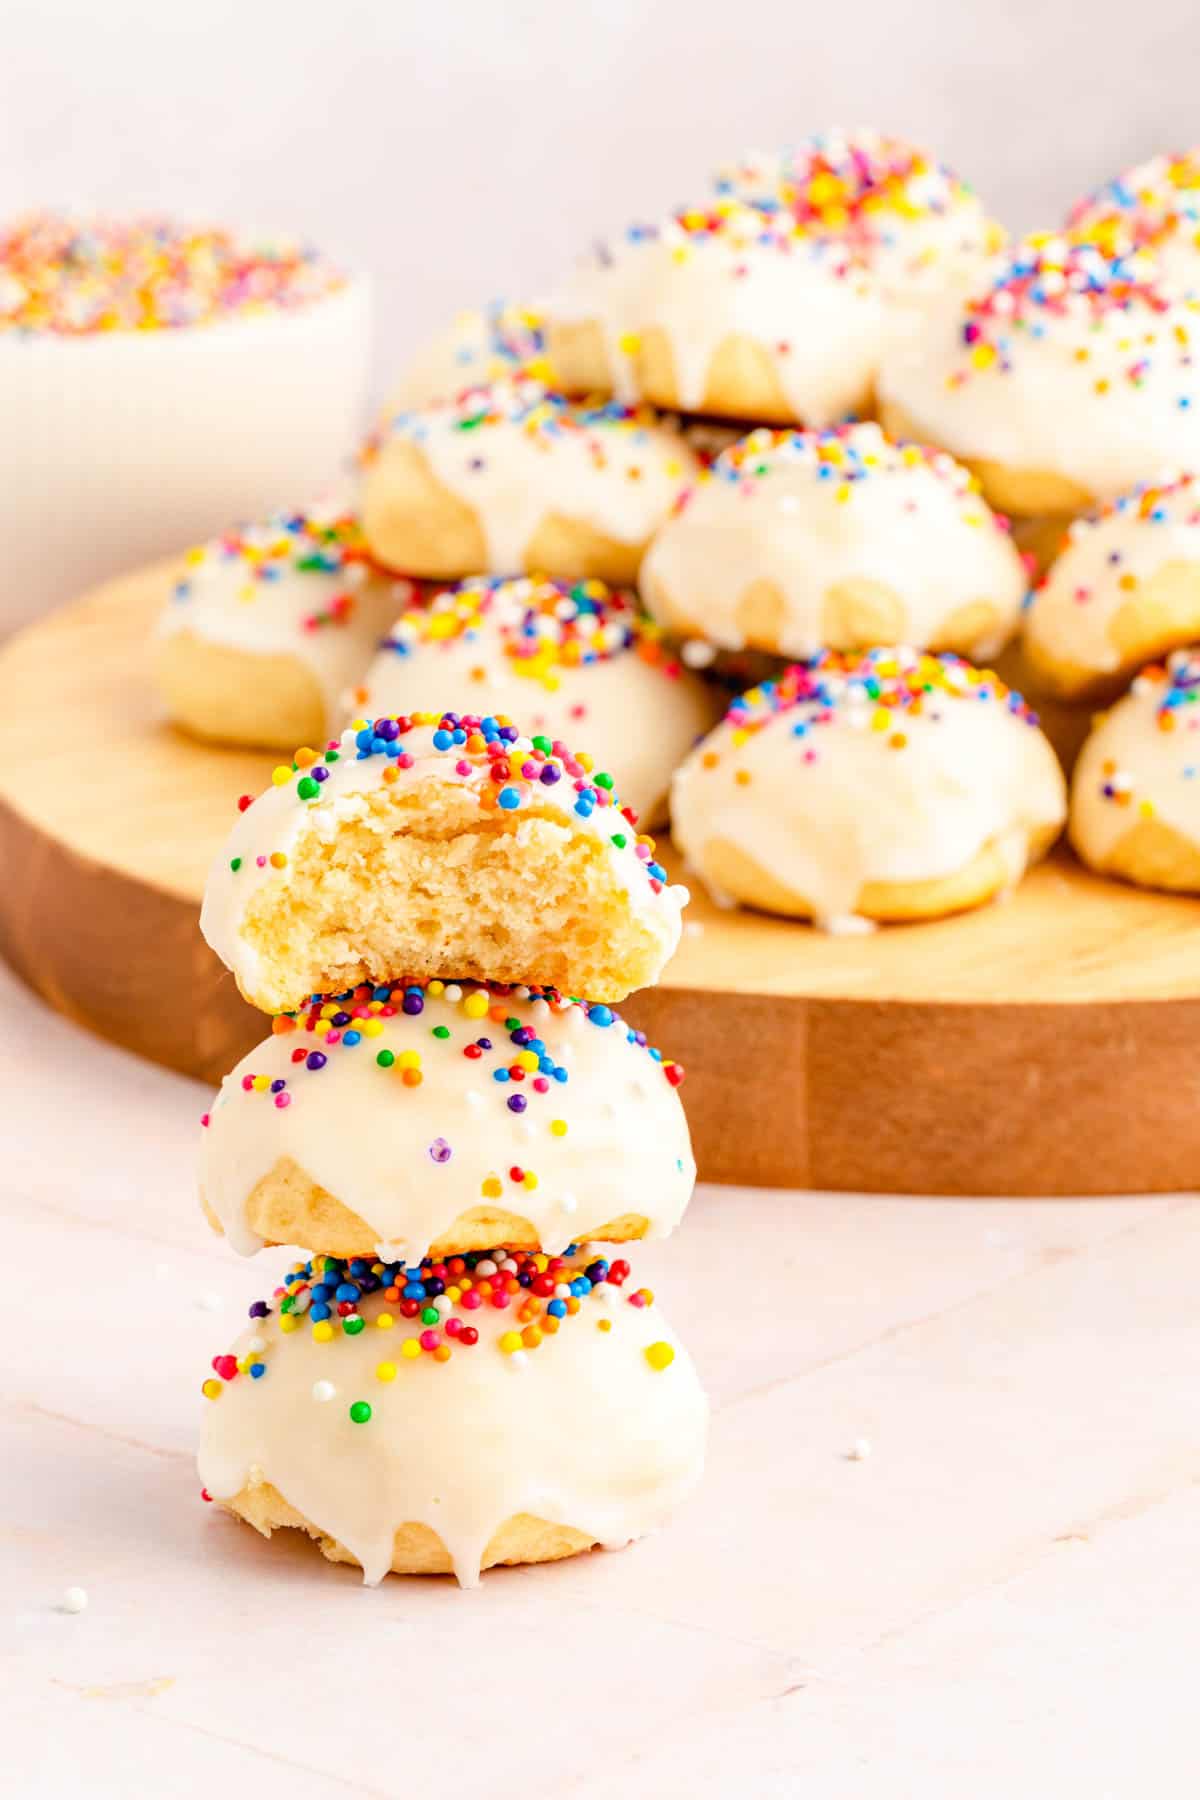 A stack of three Italian ricotta cookies with glaze and sprinkles, with bite taken out of the top cookie.